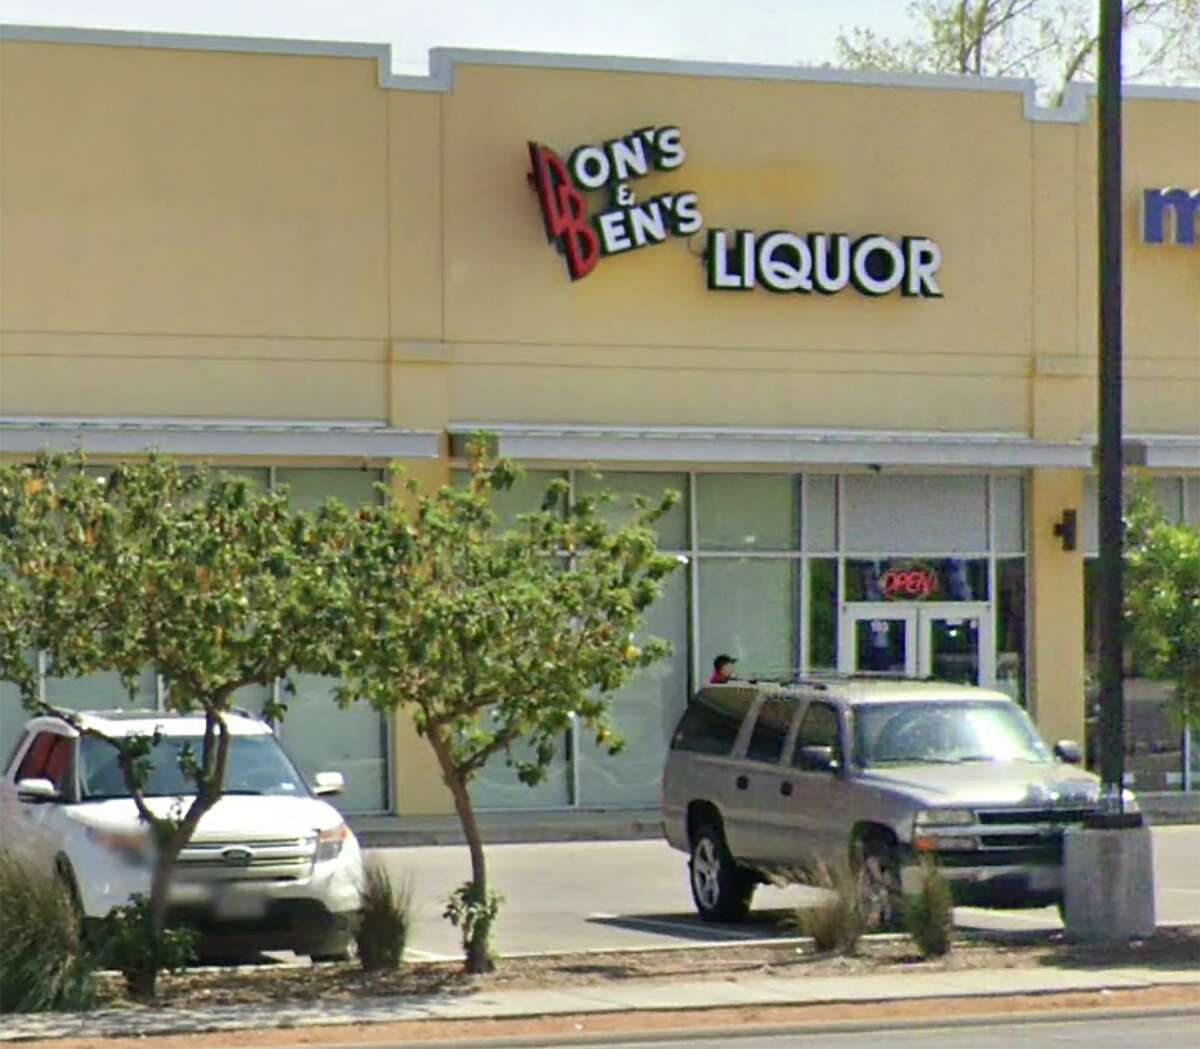 The owners of Gabriel Investment Group want a federal appeals court to allow the company to transfer its shares to a publicly traded company. New owners took over GIG in 2020 as part of a bankruptcy reorganization plan. The deal included this Don’s & Ben’s Liquor store at 810 S. Gen. McMullen Drive in San Antonio.